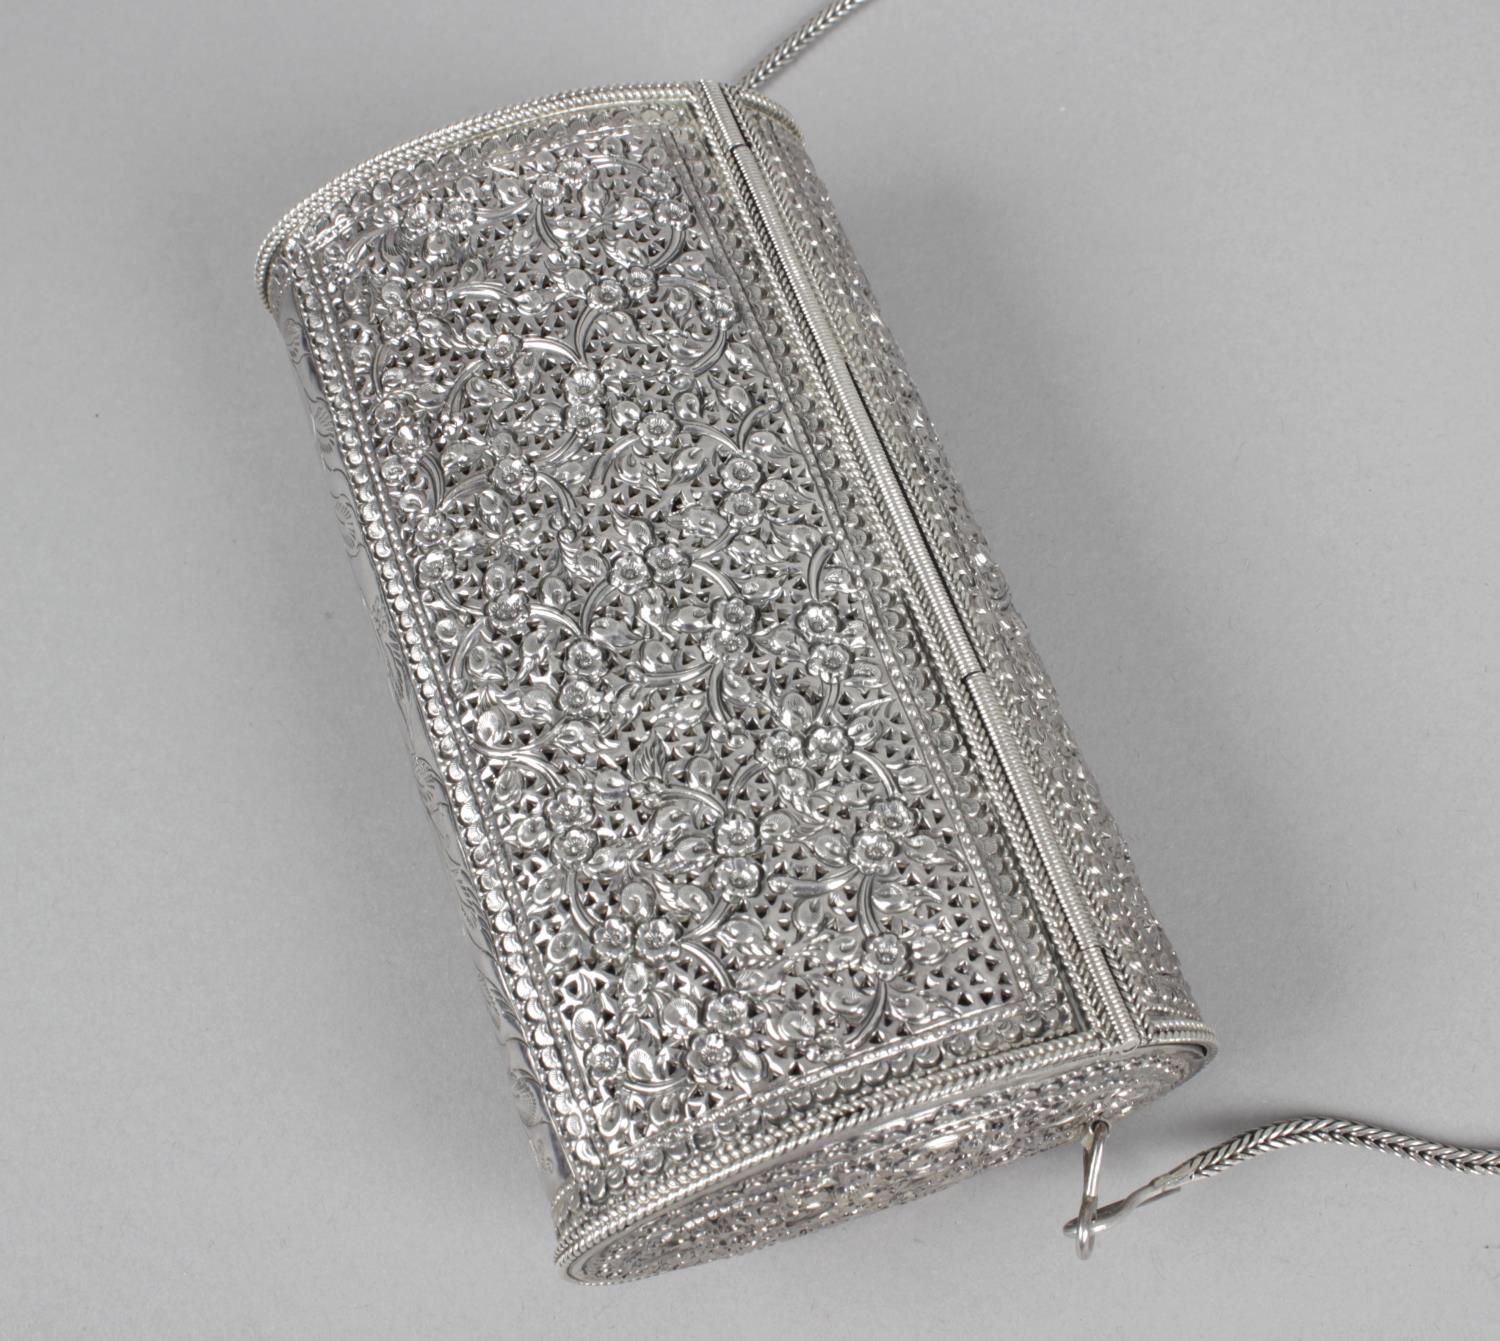 A small silver clutch bag, - Image 2 of 3